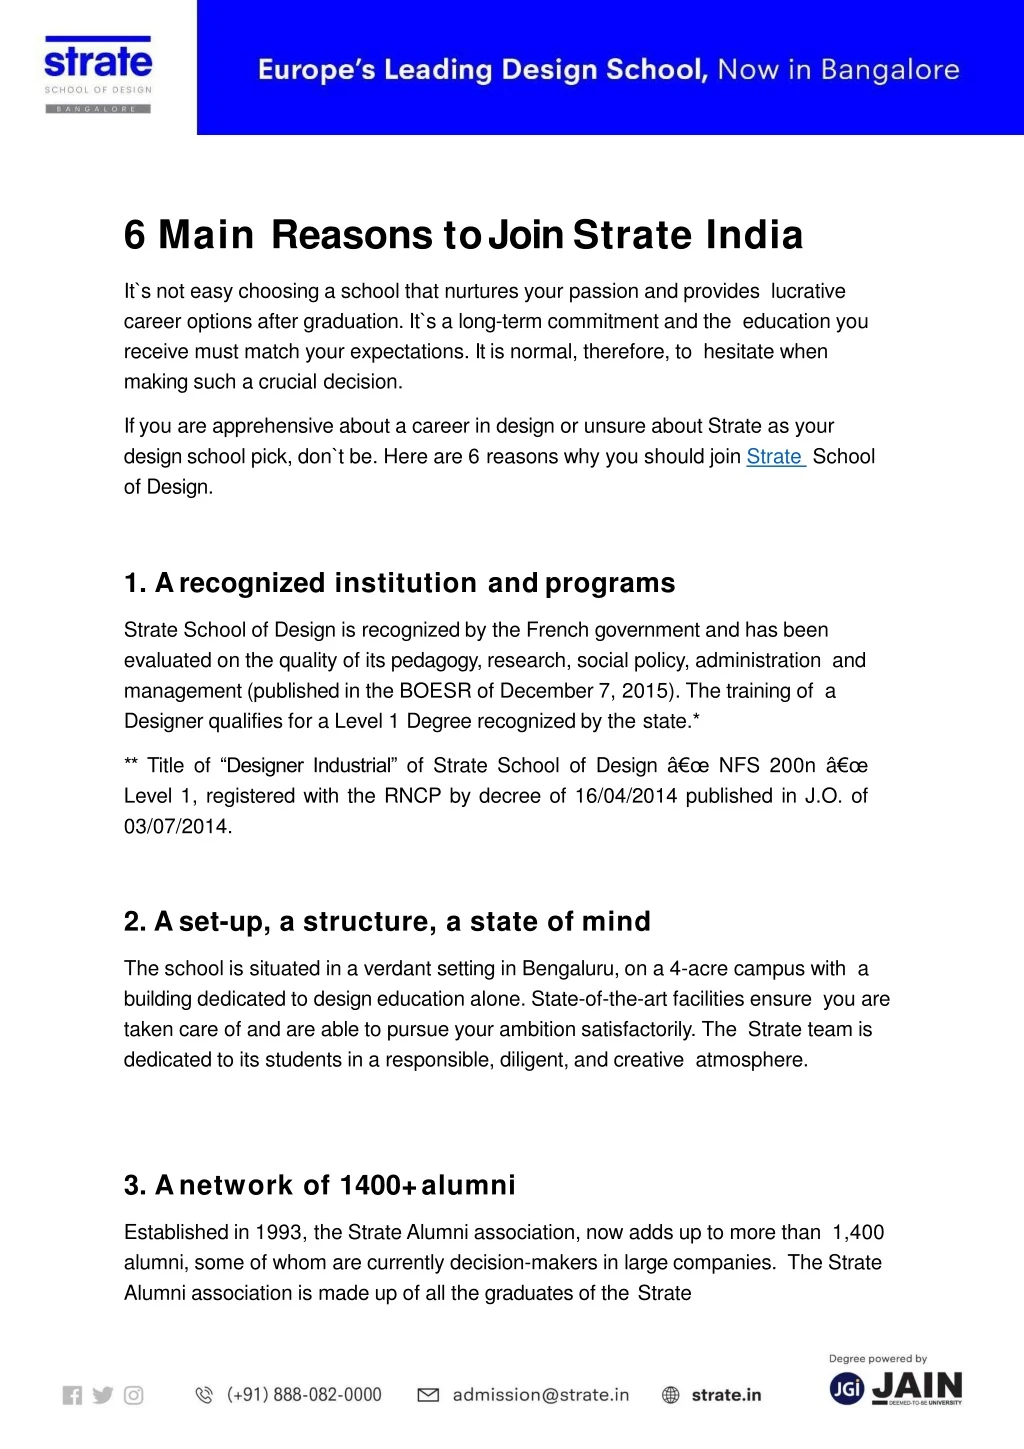 6 main reasons to join strate india